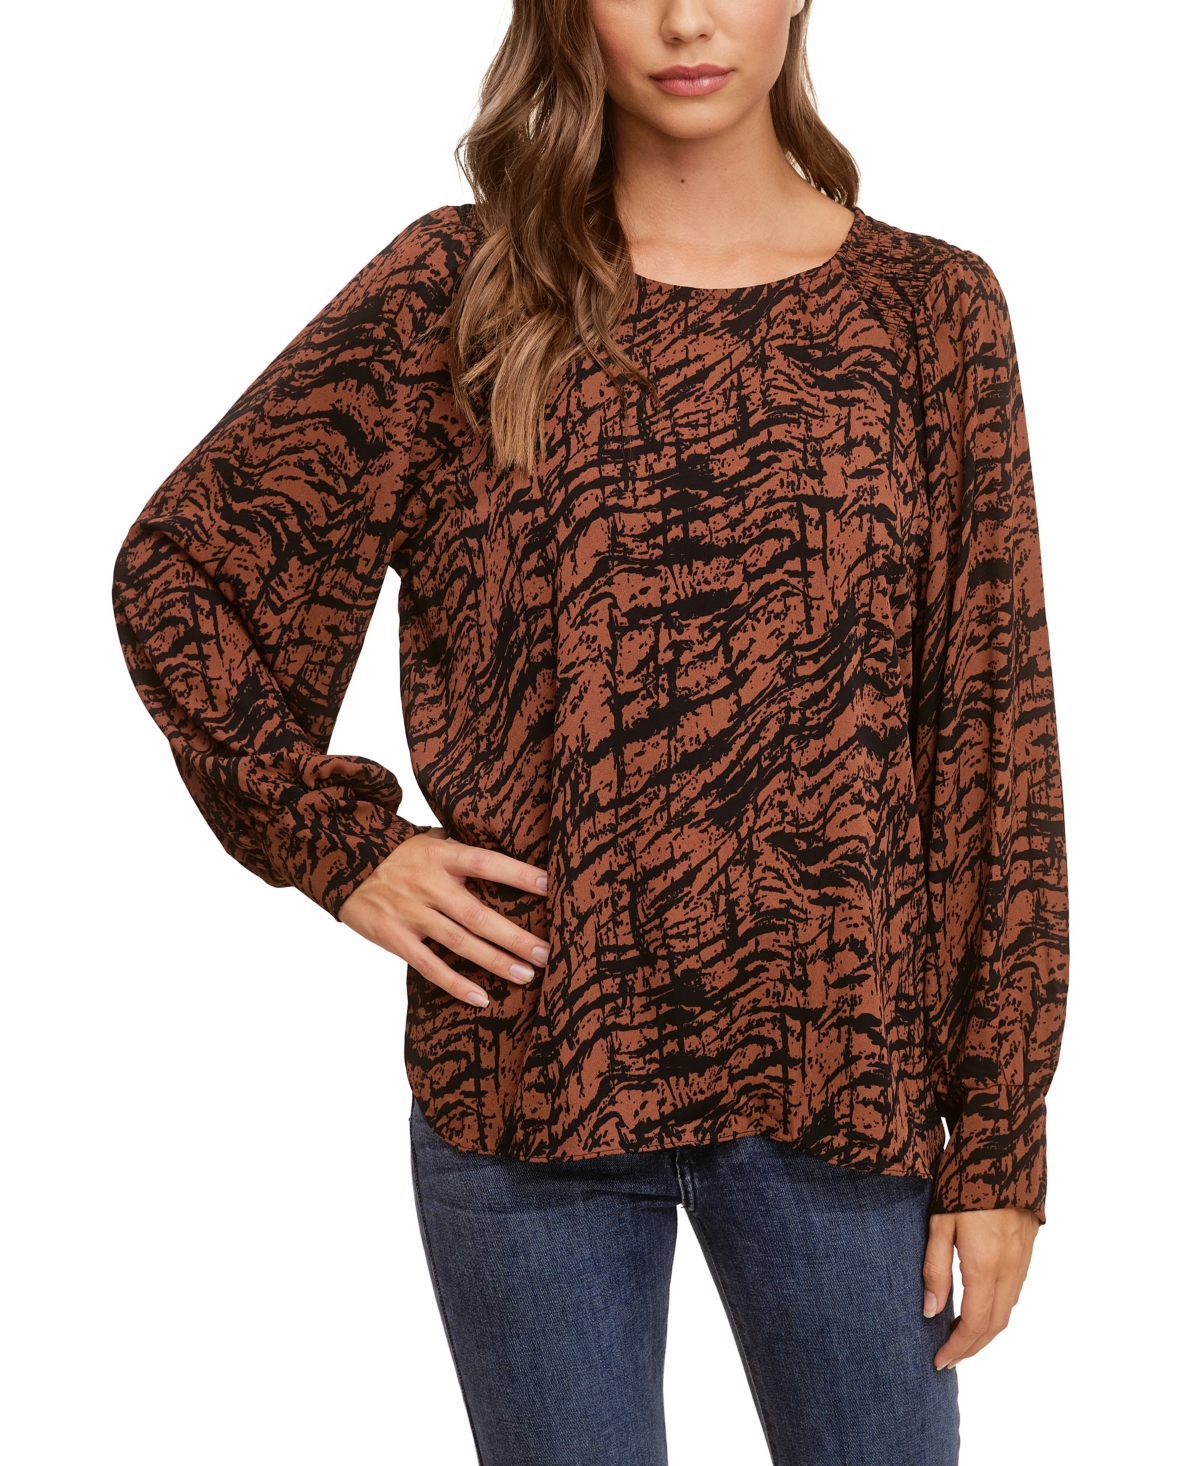 Fever Women's Printed Soft Crepe Blouse With Smocking In Brown,black